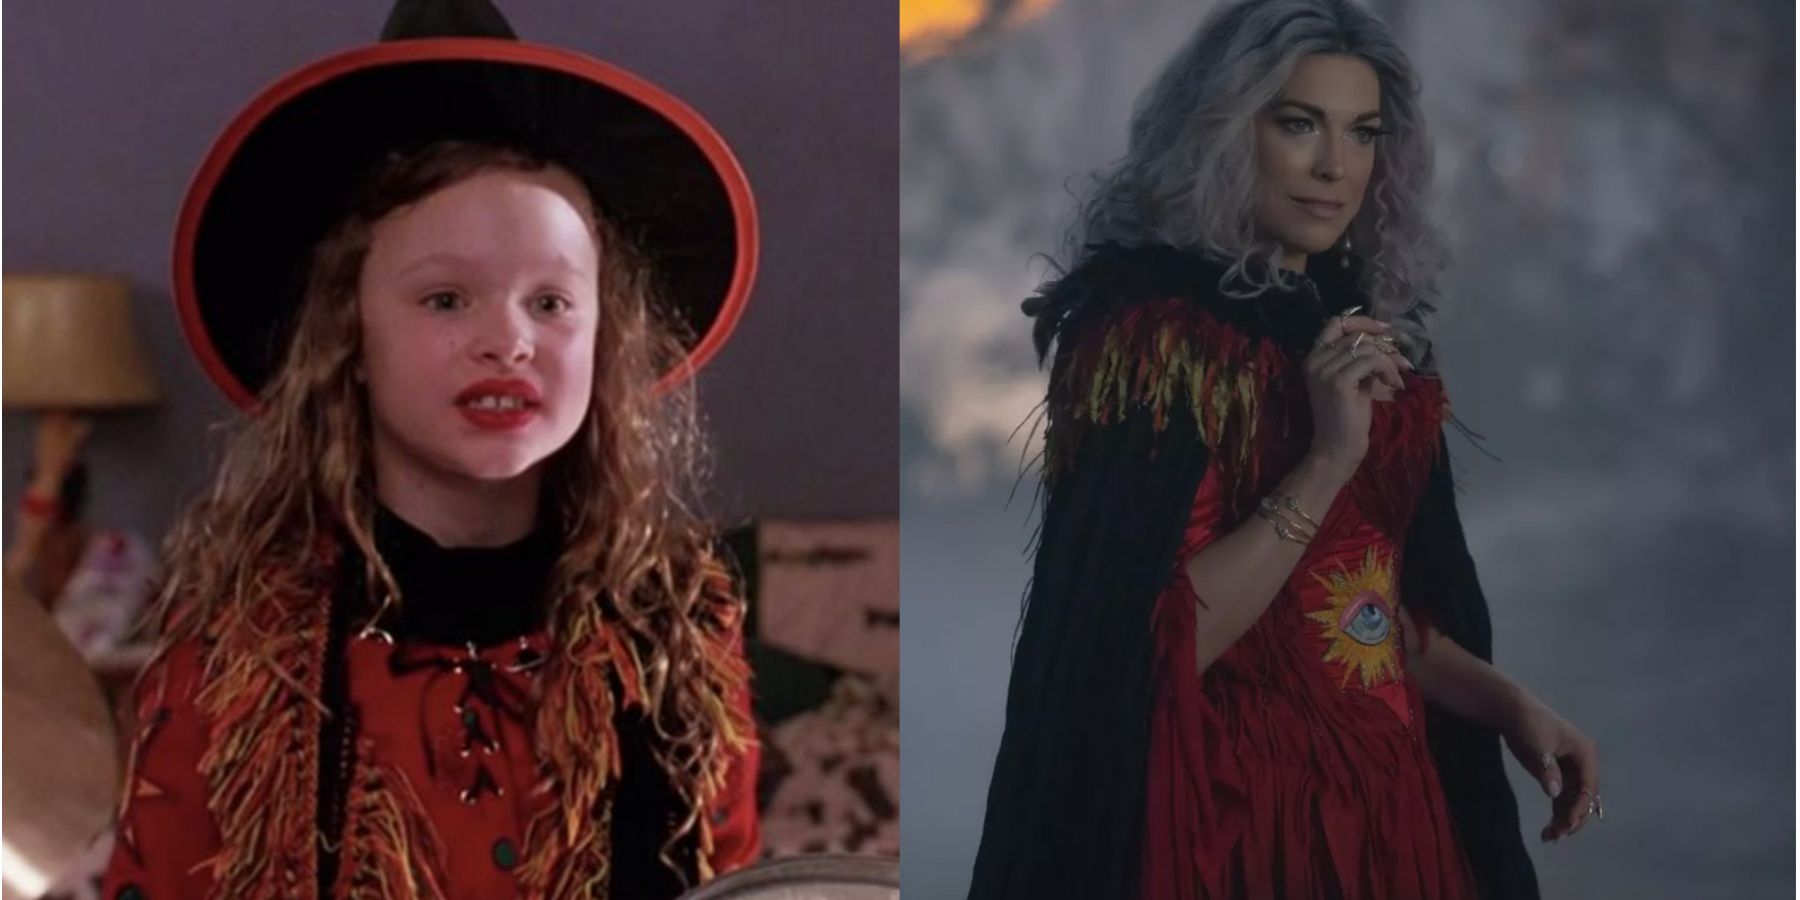 A split image features Dani in Hocus Pocus and the Mother Witch in Hocus Pocus 2